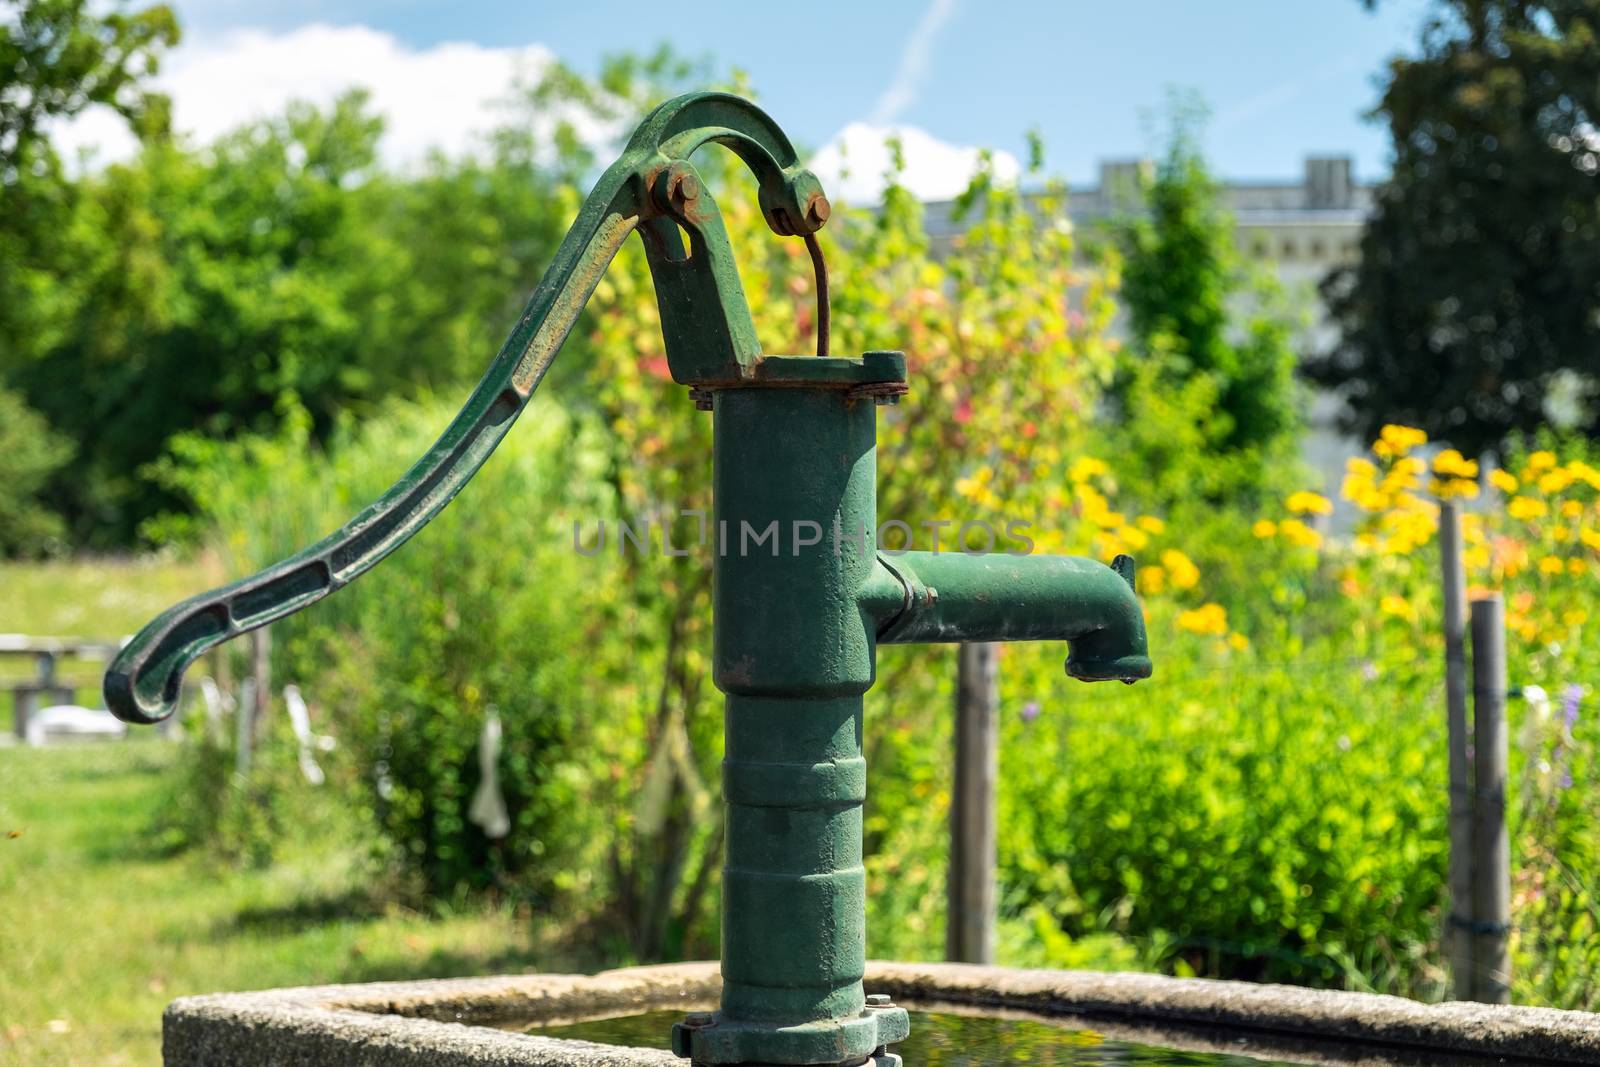 Manual water pump at Klenze Park in Ingolstadt by w20er